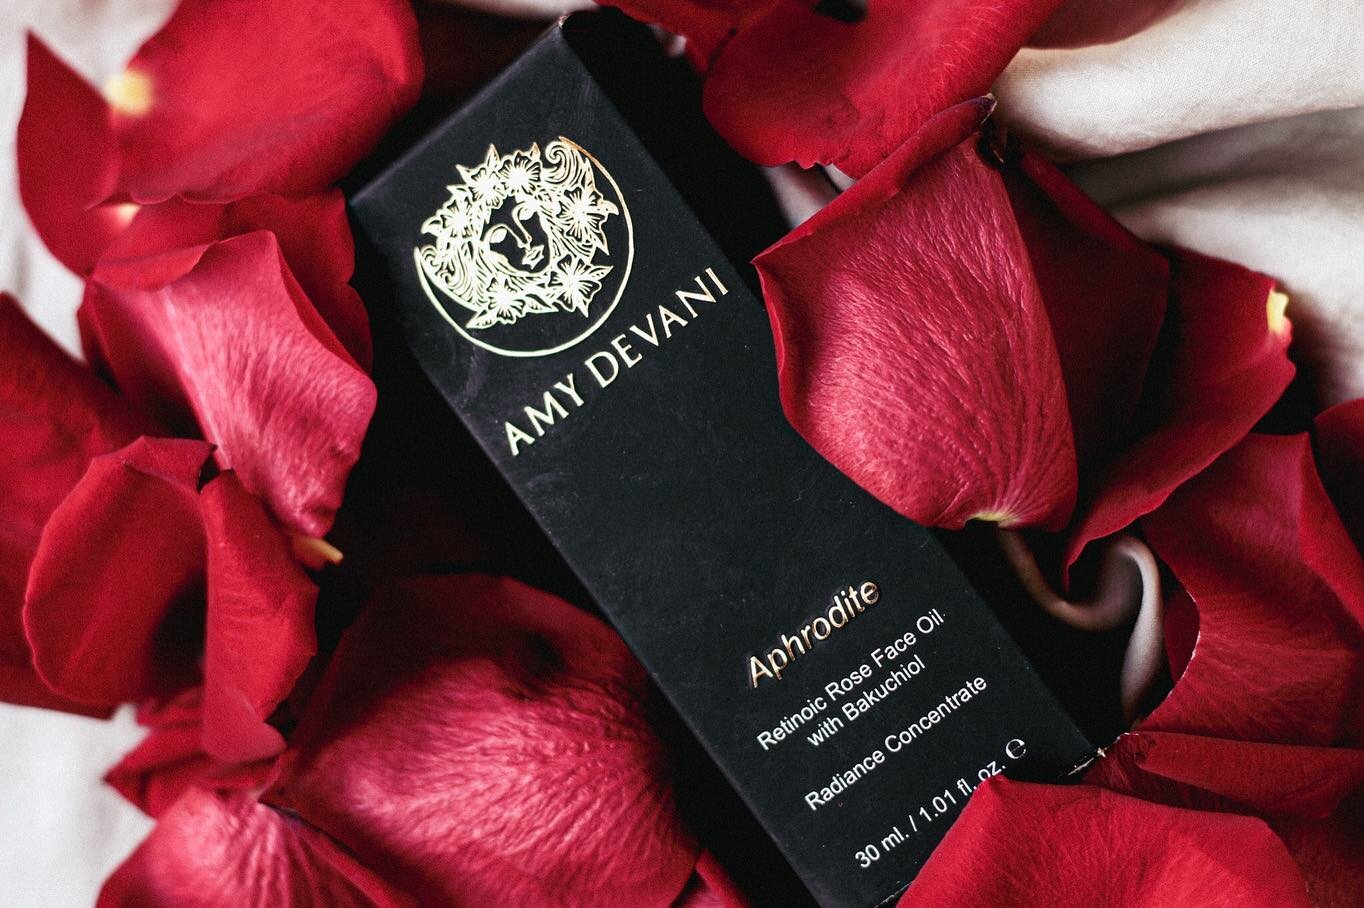 Aphrodite radiance concentrate &hearts;️🌹&hearts;️
Deep sultry rose with result-driven actives such as natural retinol from bakuchiol, organic extracts of rosehip, raspberry &amp; sea buckthorn, everlasting, sandalwood and rock rose. 

Sumptuous nou